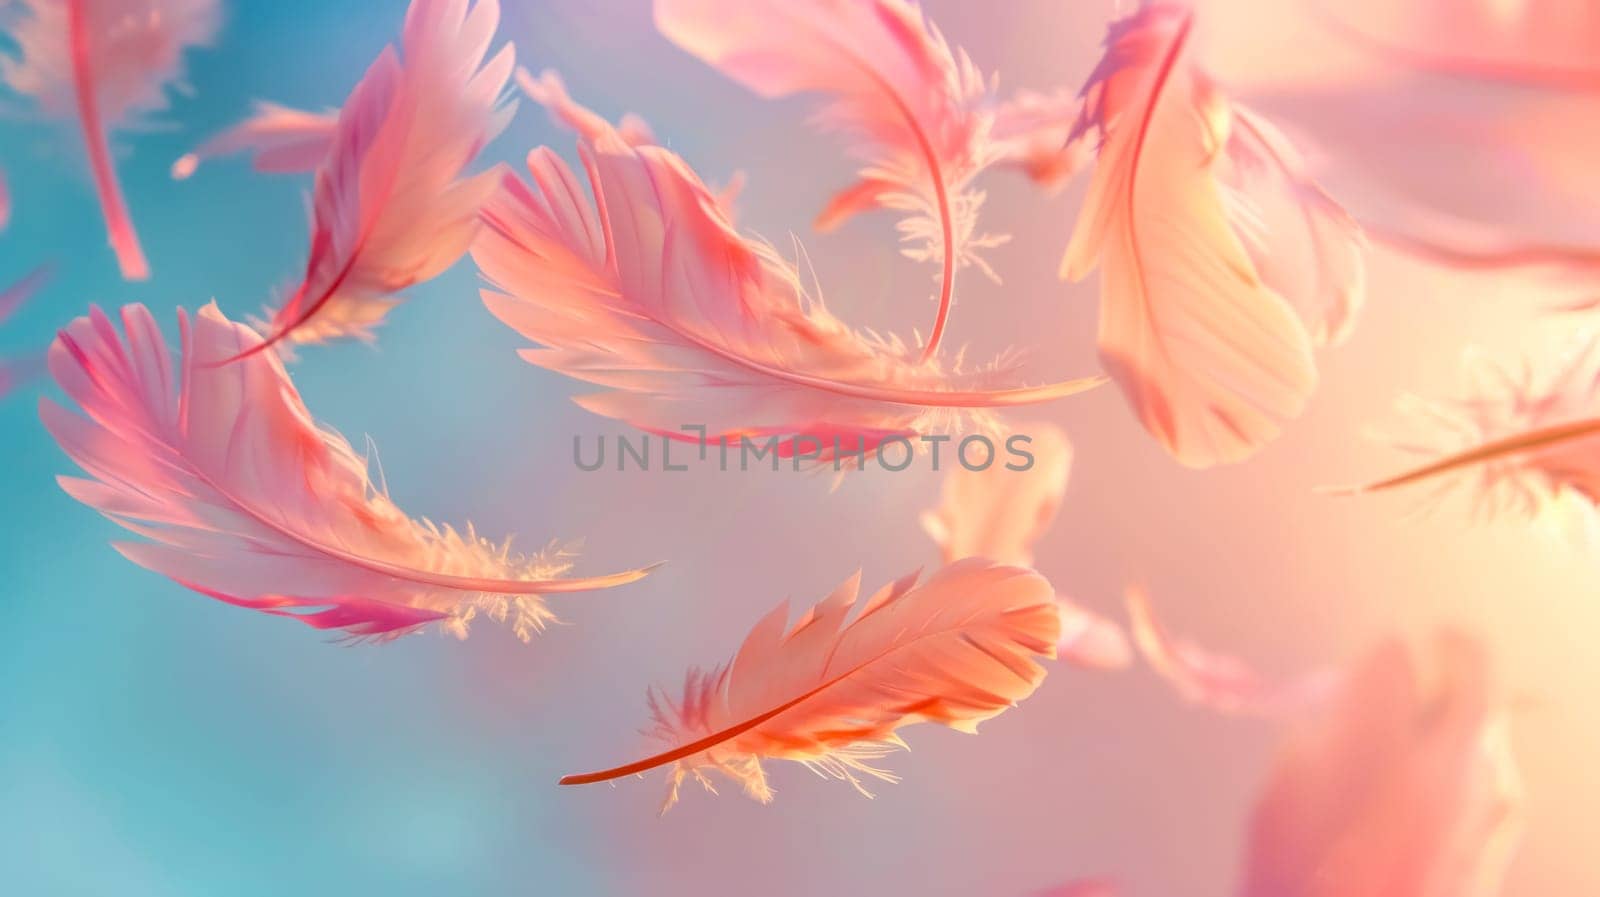 Pastel dreamscape with floating feathers by Edophoto